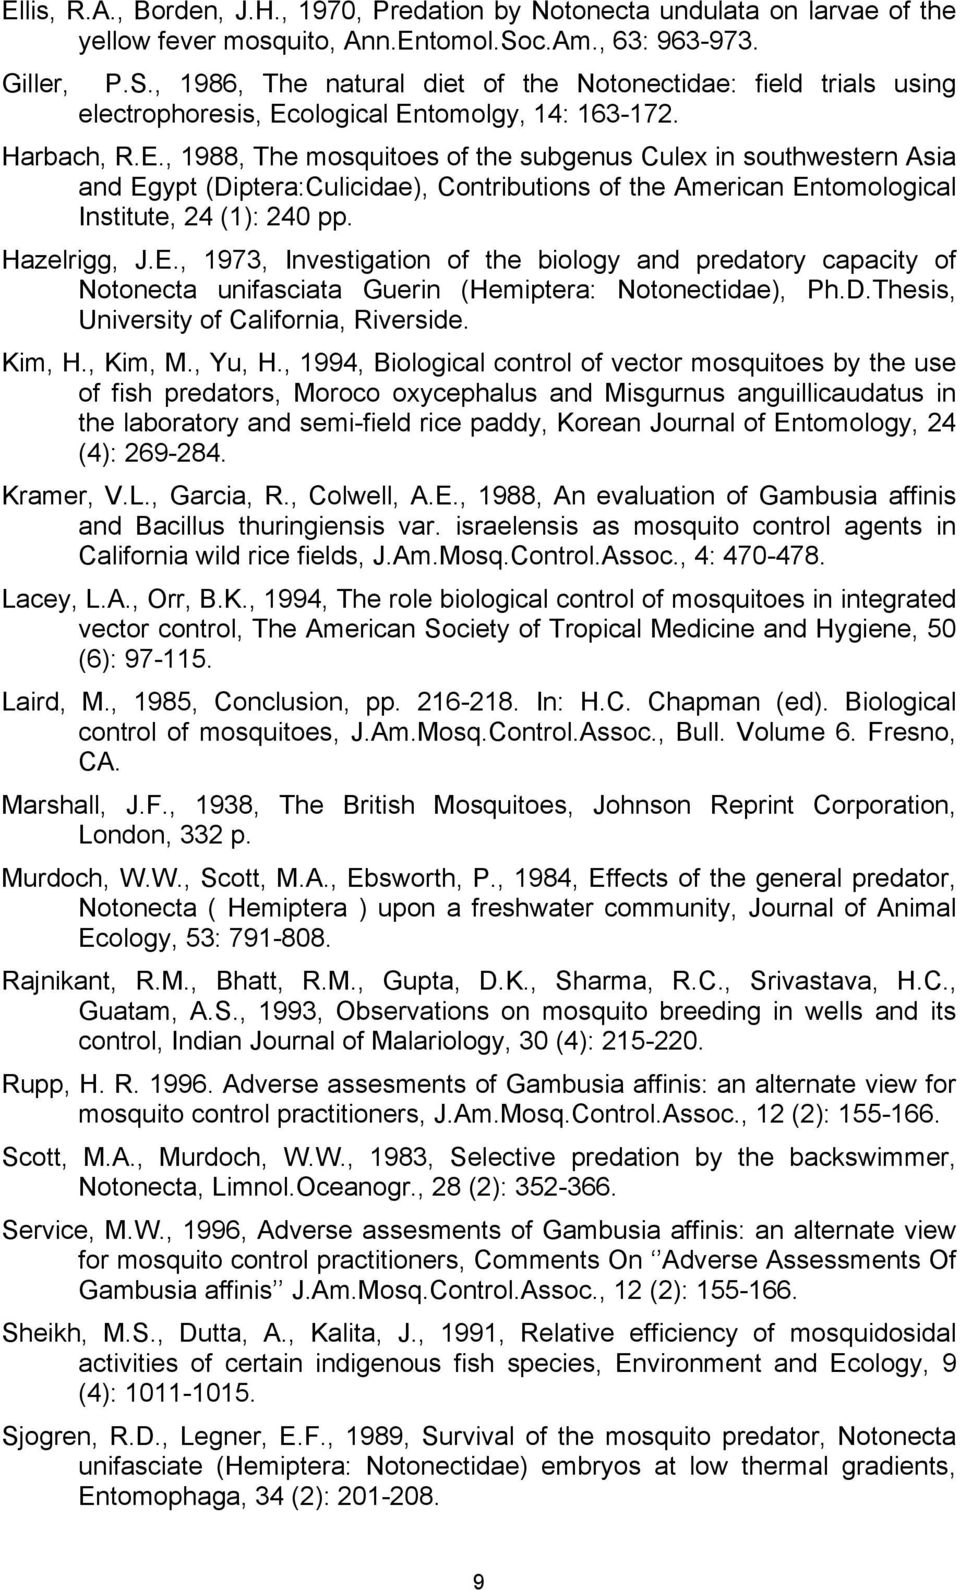 ological Entomolgy, 14: 163-172. Harbach, R.E., 1988, The mosquitoes of the subgenus Culex in southwestern Asia and Egypt (Diptera:Culicidae), Contributions of the American Entomological Institute, 24 (1): 240 pp.